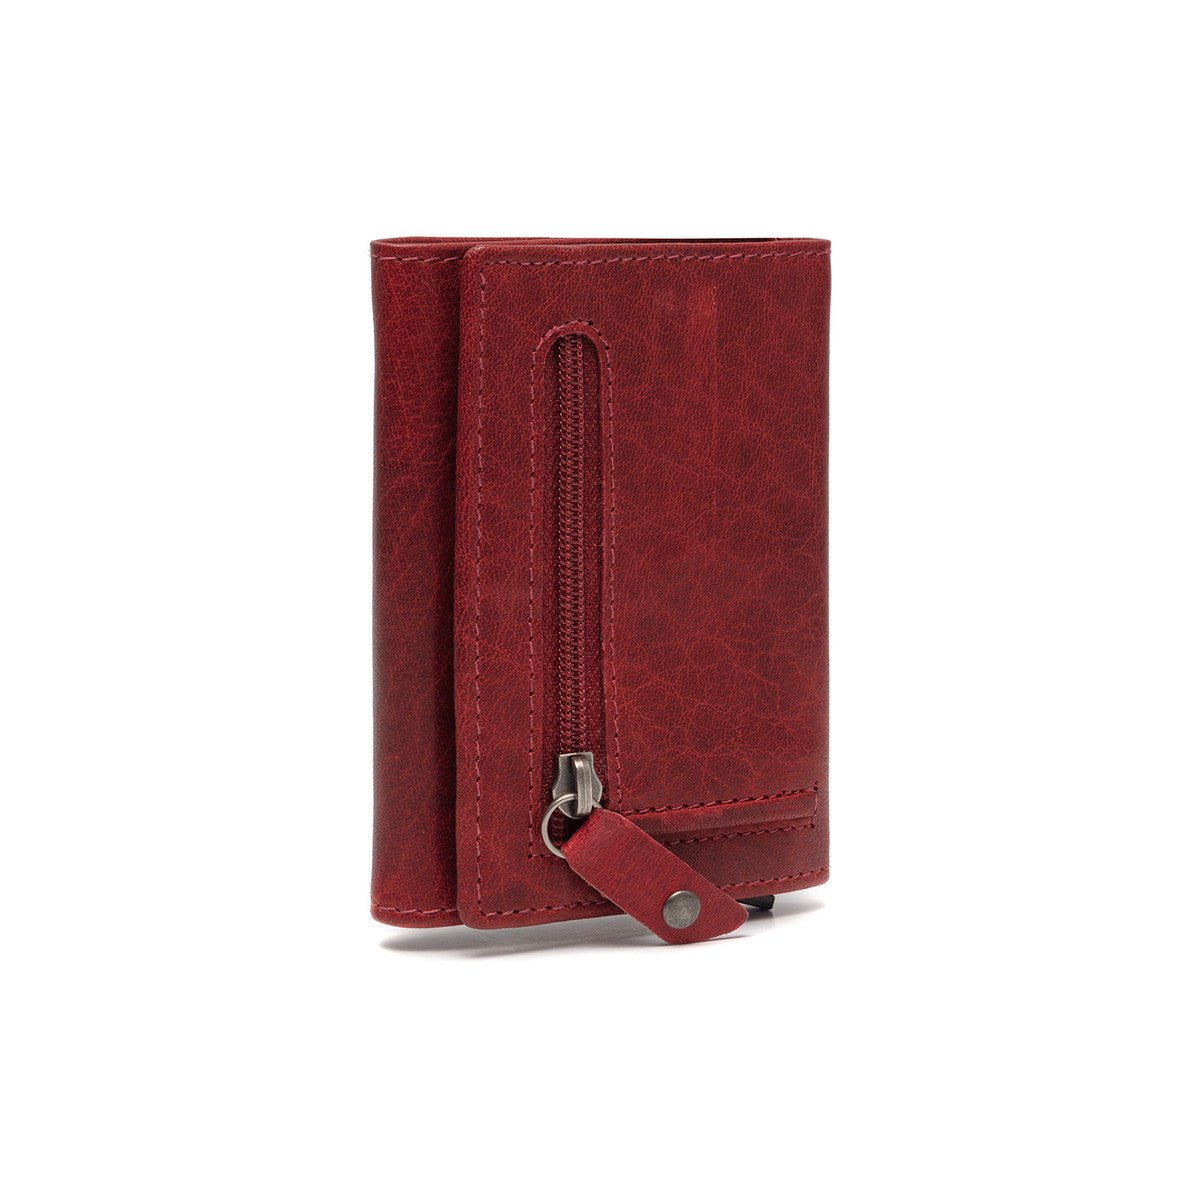 Chesterfield Paris Leather Wallet | Red - iBags - Luggage & Leather Bags